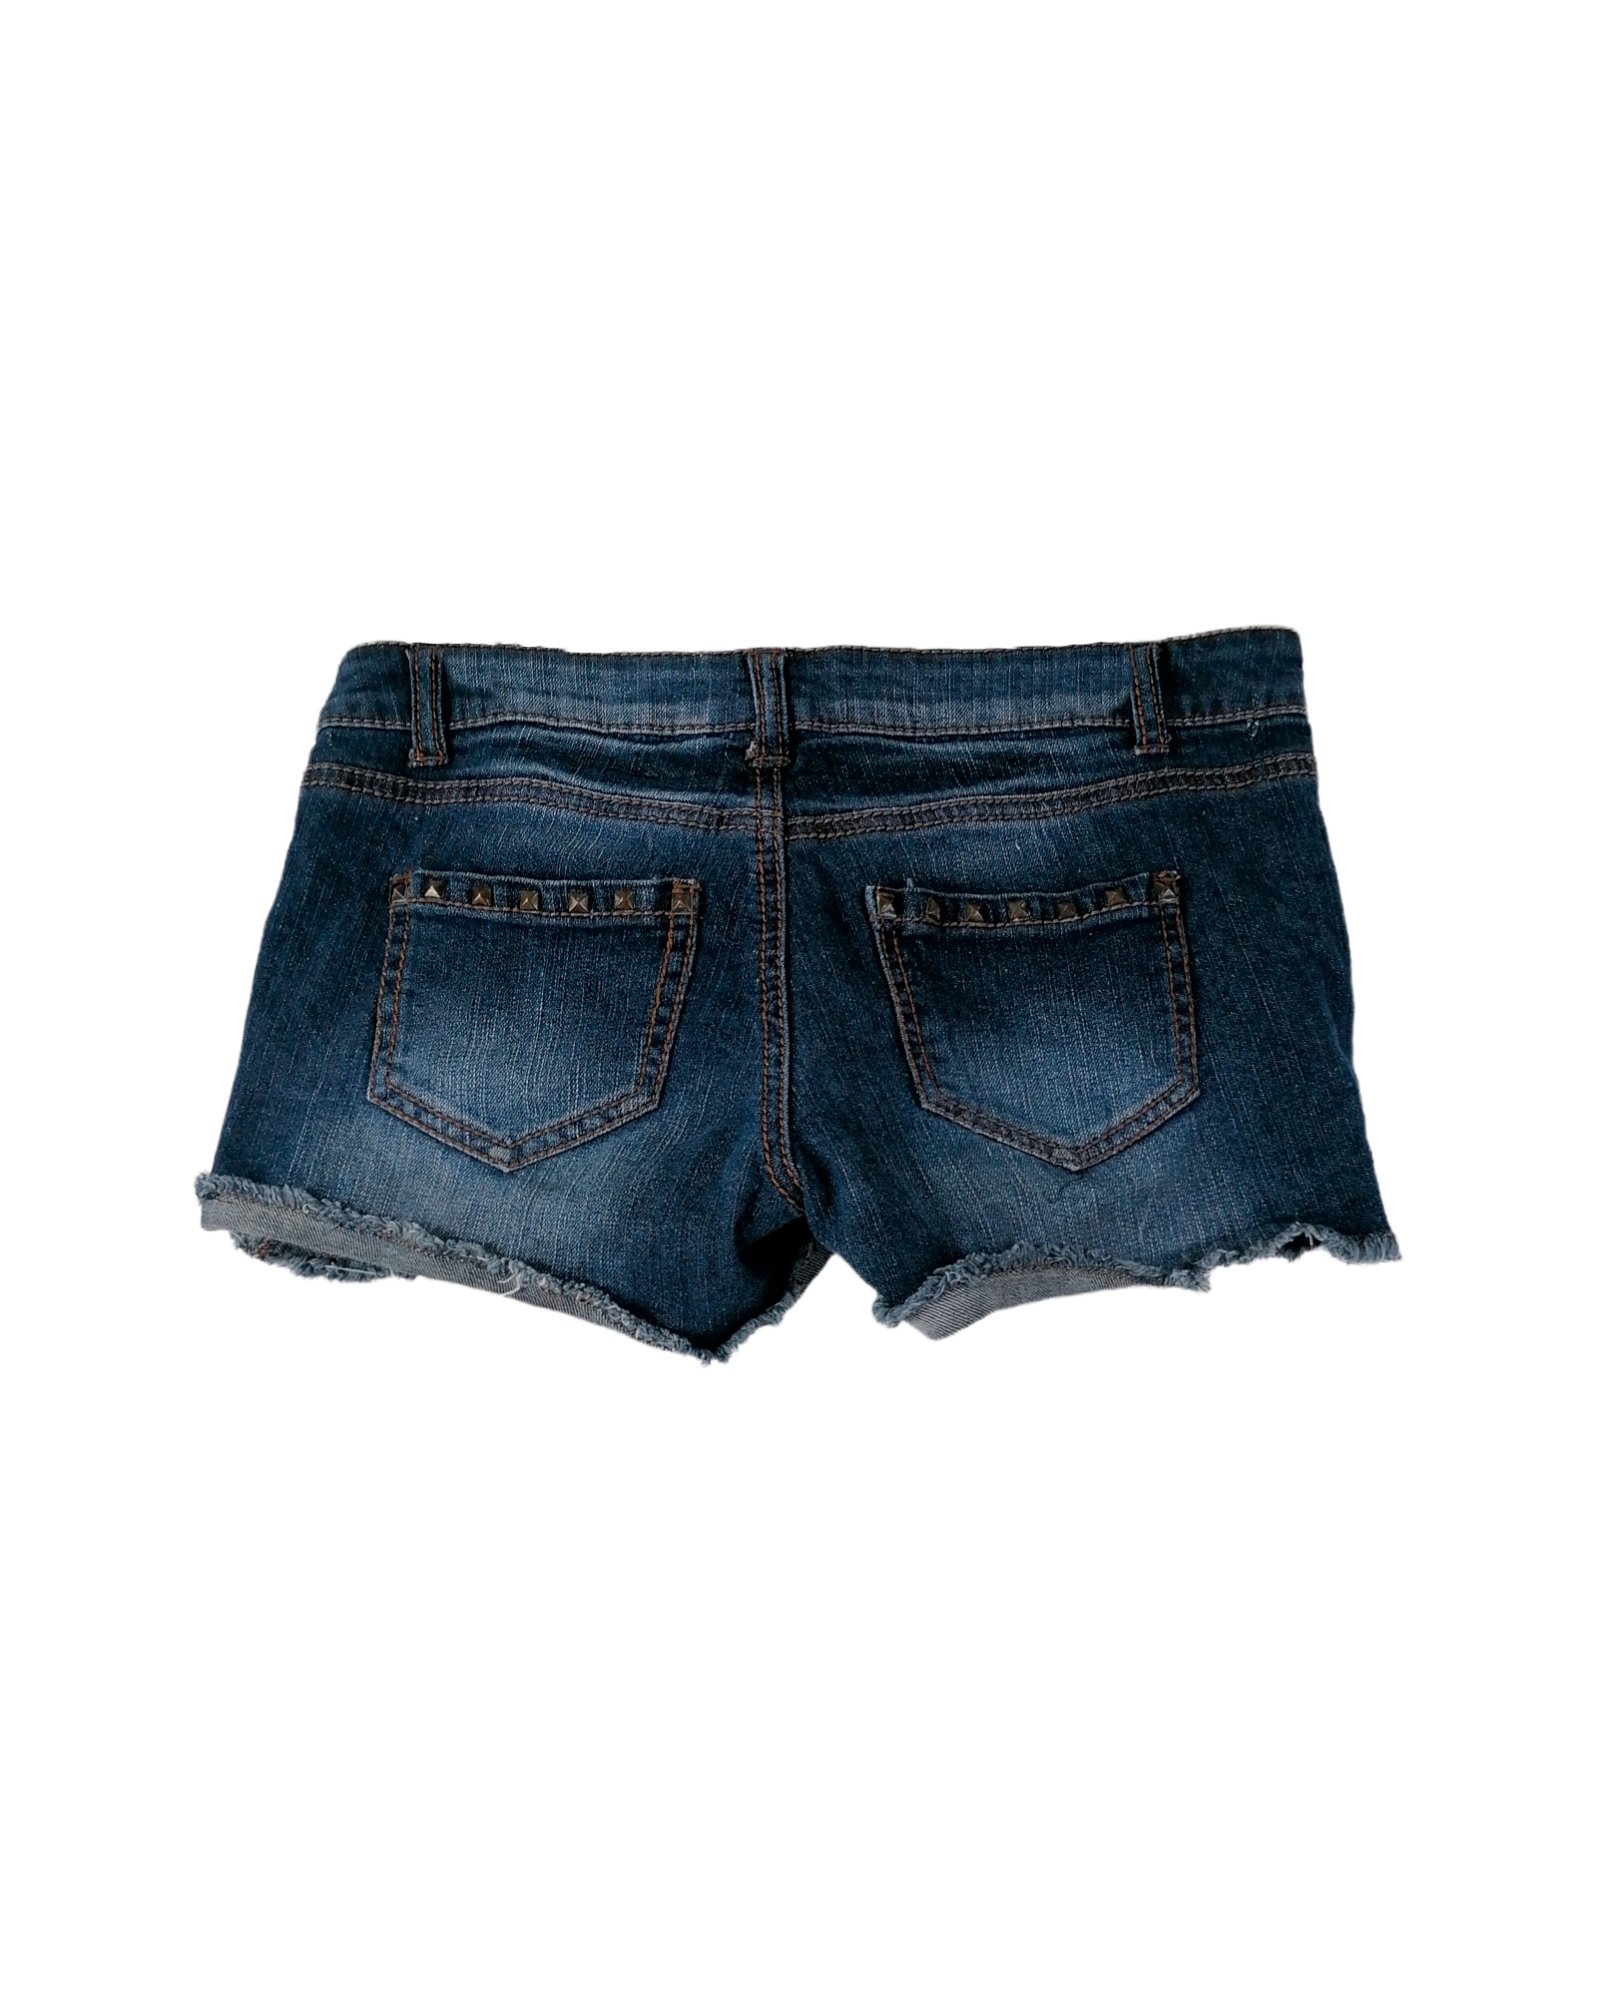 Shorts Jeans